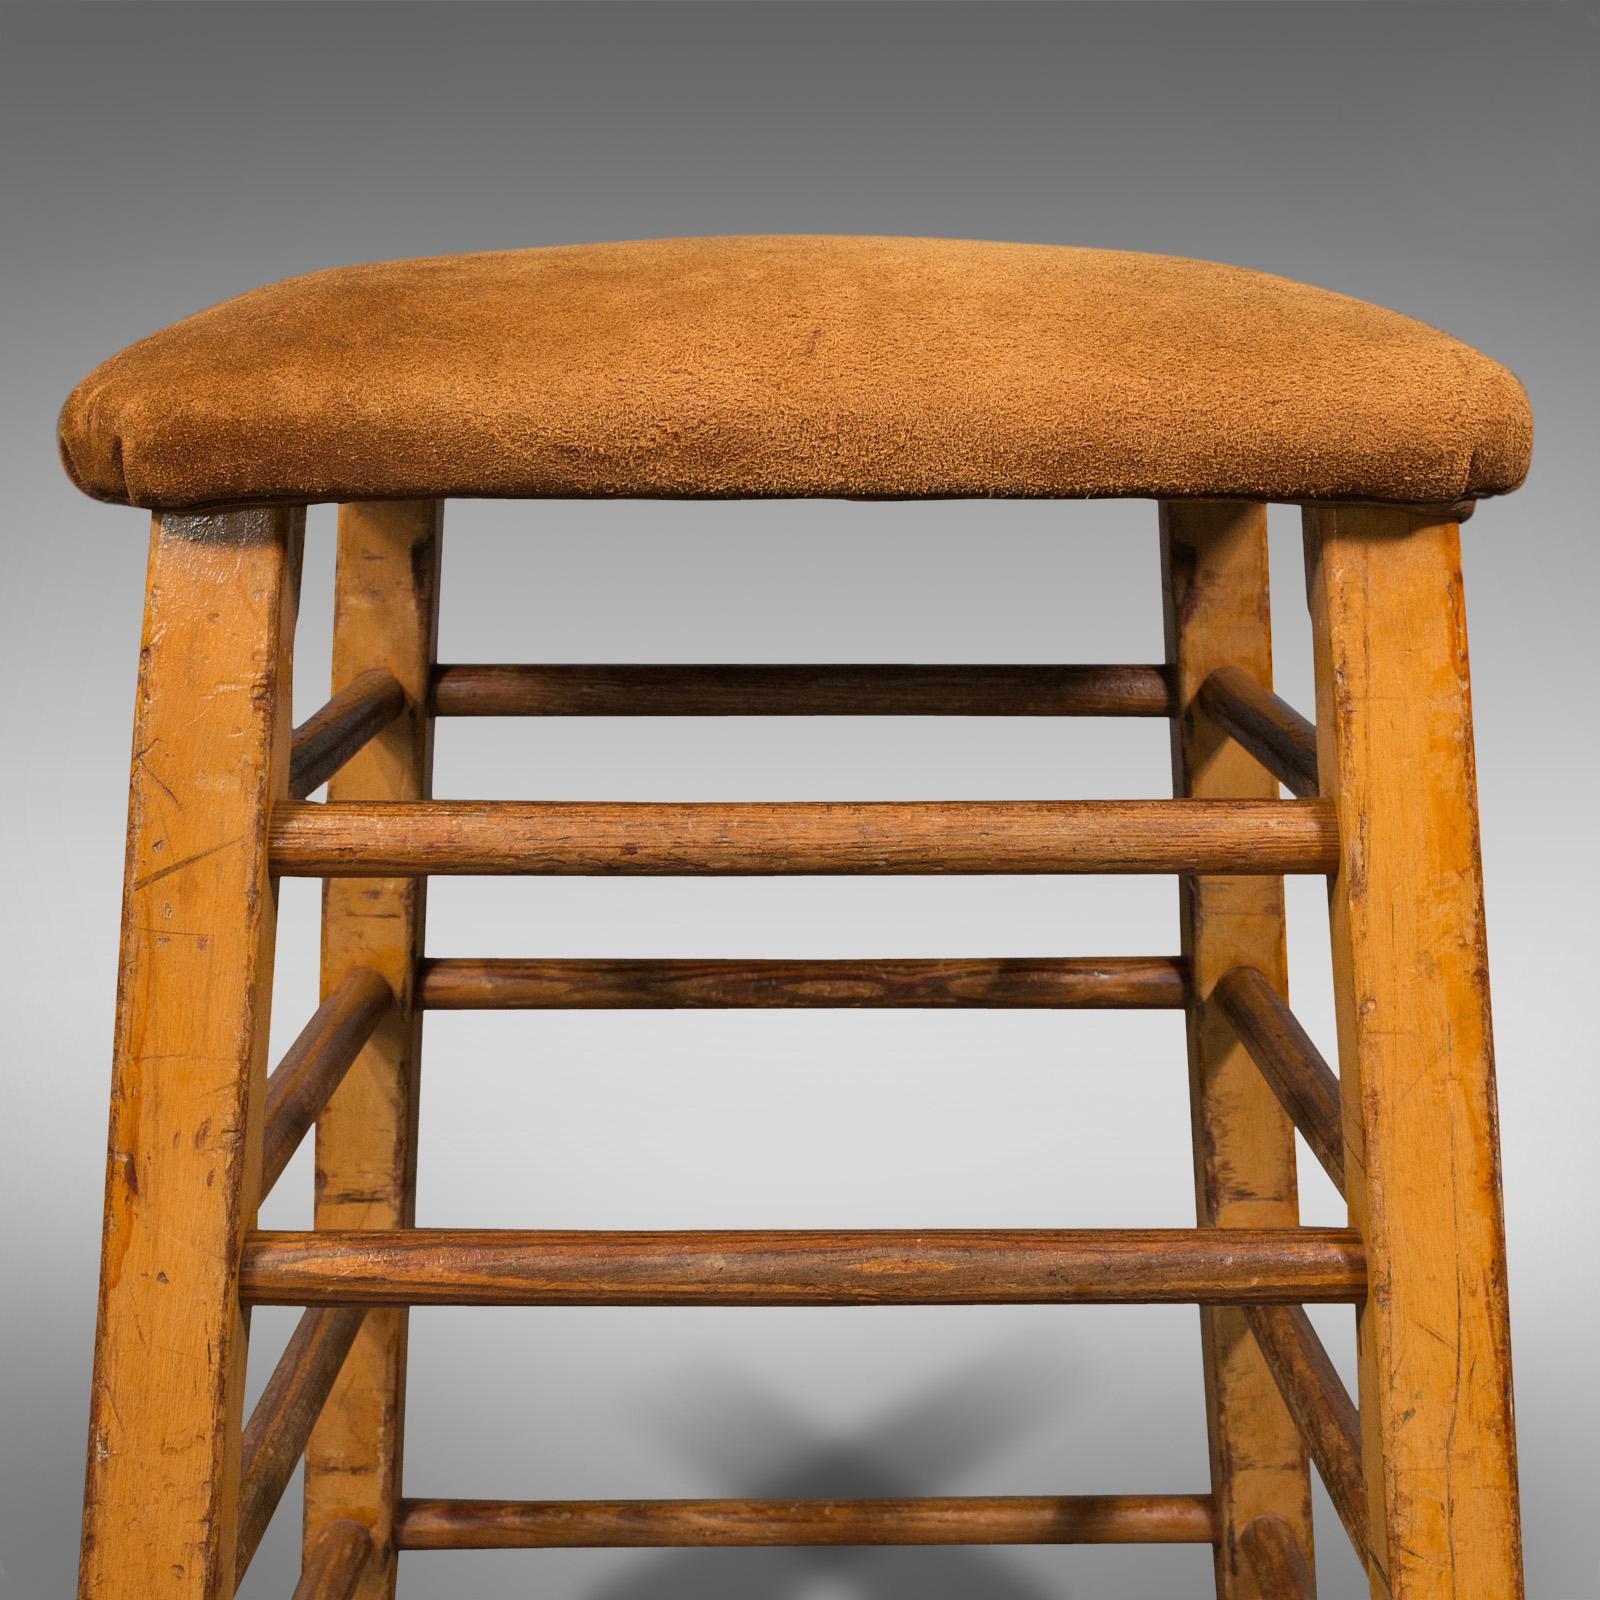 Large Vintage Artist's Stool, English, Pitch Pine, Suede, Gym, Lab Seat, C.1960 For Sale 3